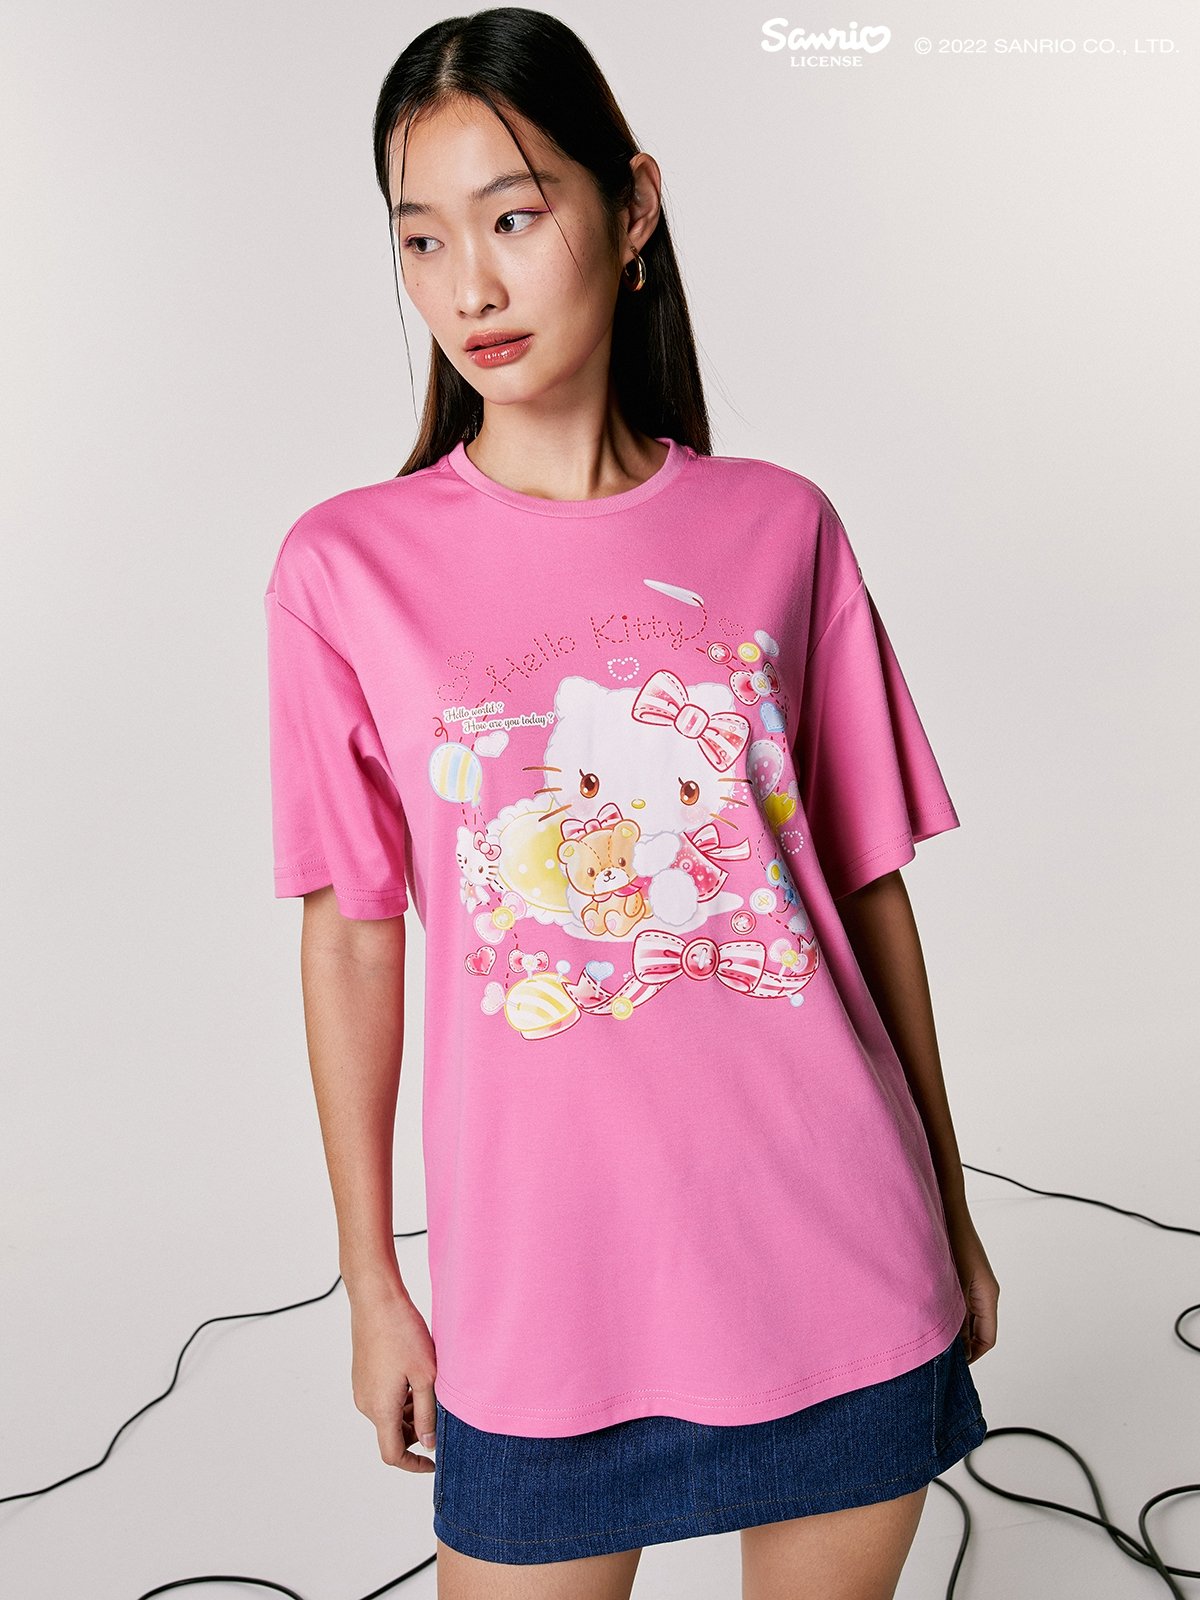 Pomelo x Hello Kitty Sustainable Graphic T-Shirt - Pink - Pomelo Fashion